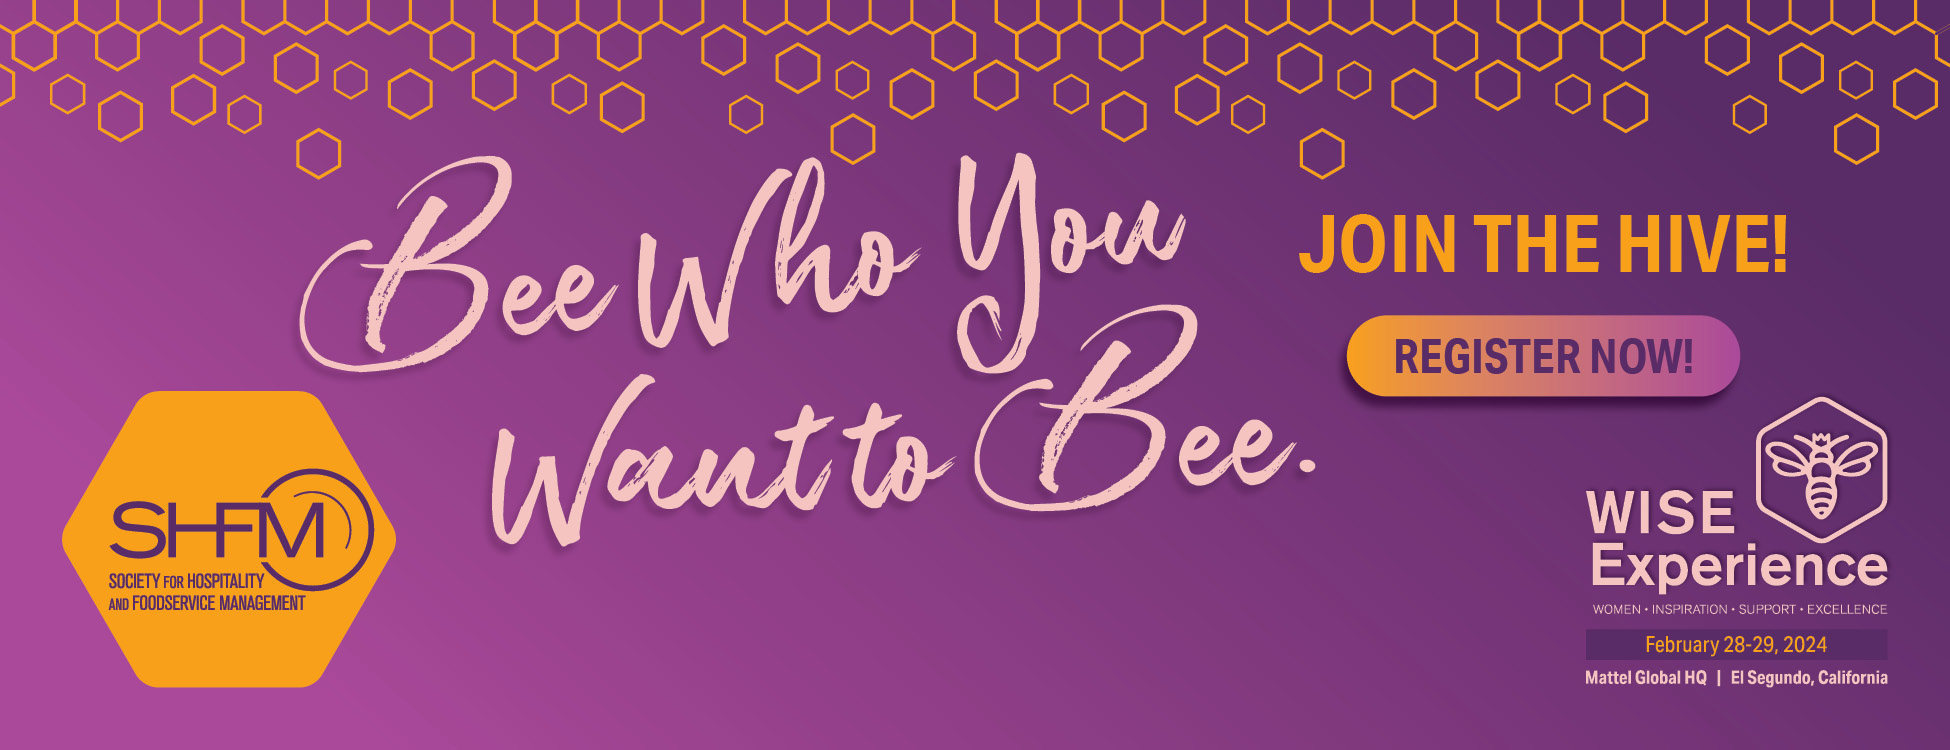 Society for Foodservice and Hospitality Management (SHFM). Wise Experience,February 28-29, 2024. Mattel Global HQ, El Segundo, California. Bee Who You Want To Bee. Join the hive! Register now.